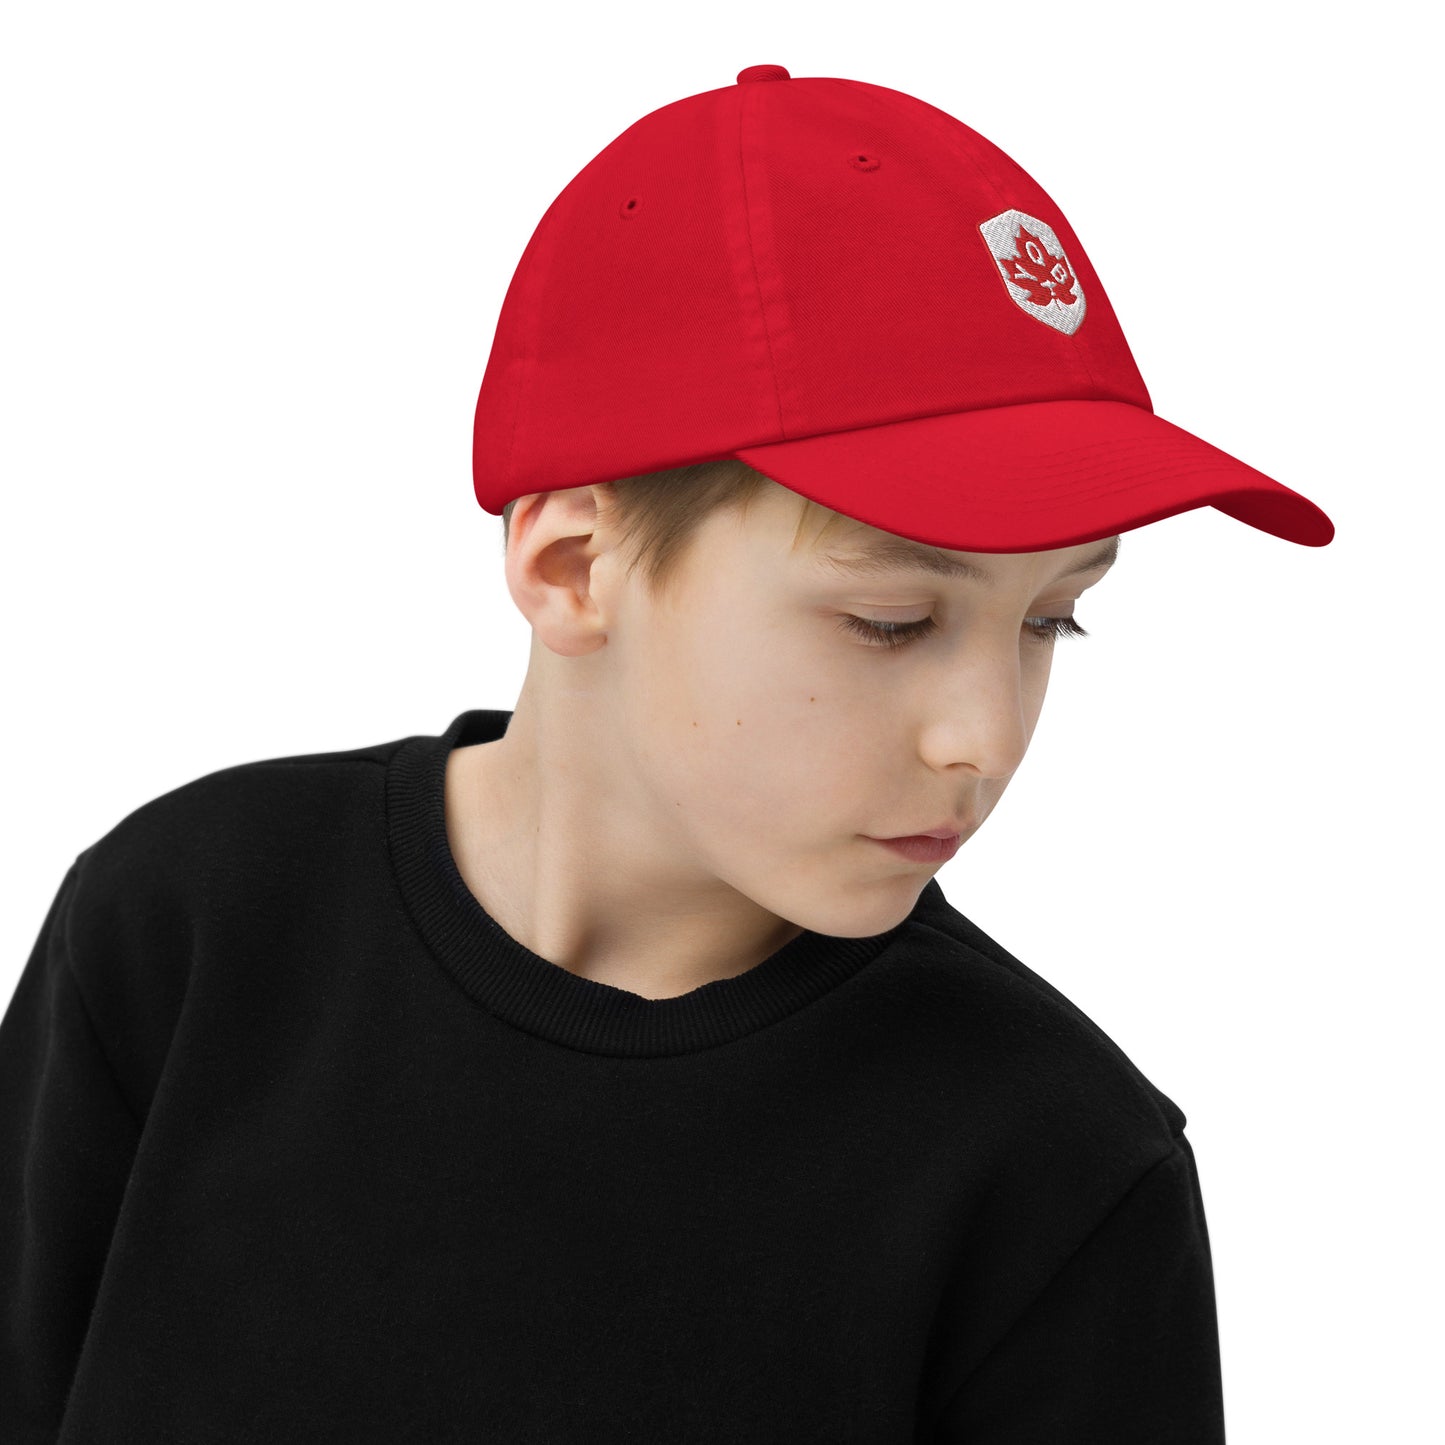 Maple Leaf Kid's Cap - Red/White • YQB Quebec City • YHM Designs - Image 08